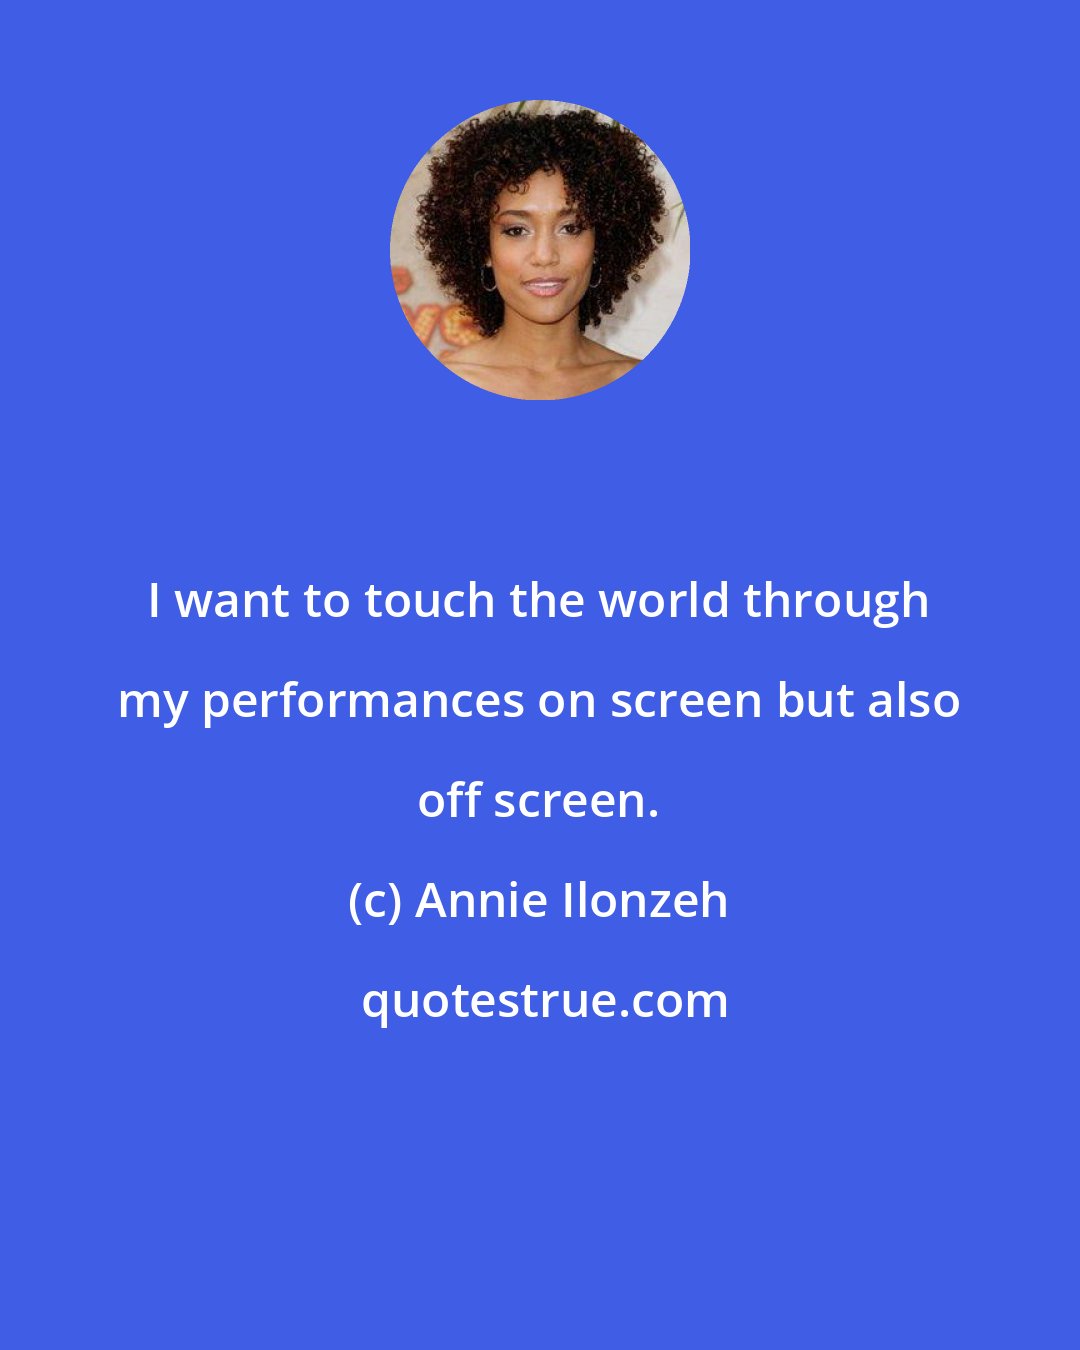 Annie Ilonzeh: I want to touch the world through my performances on screen but also off screen.